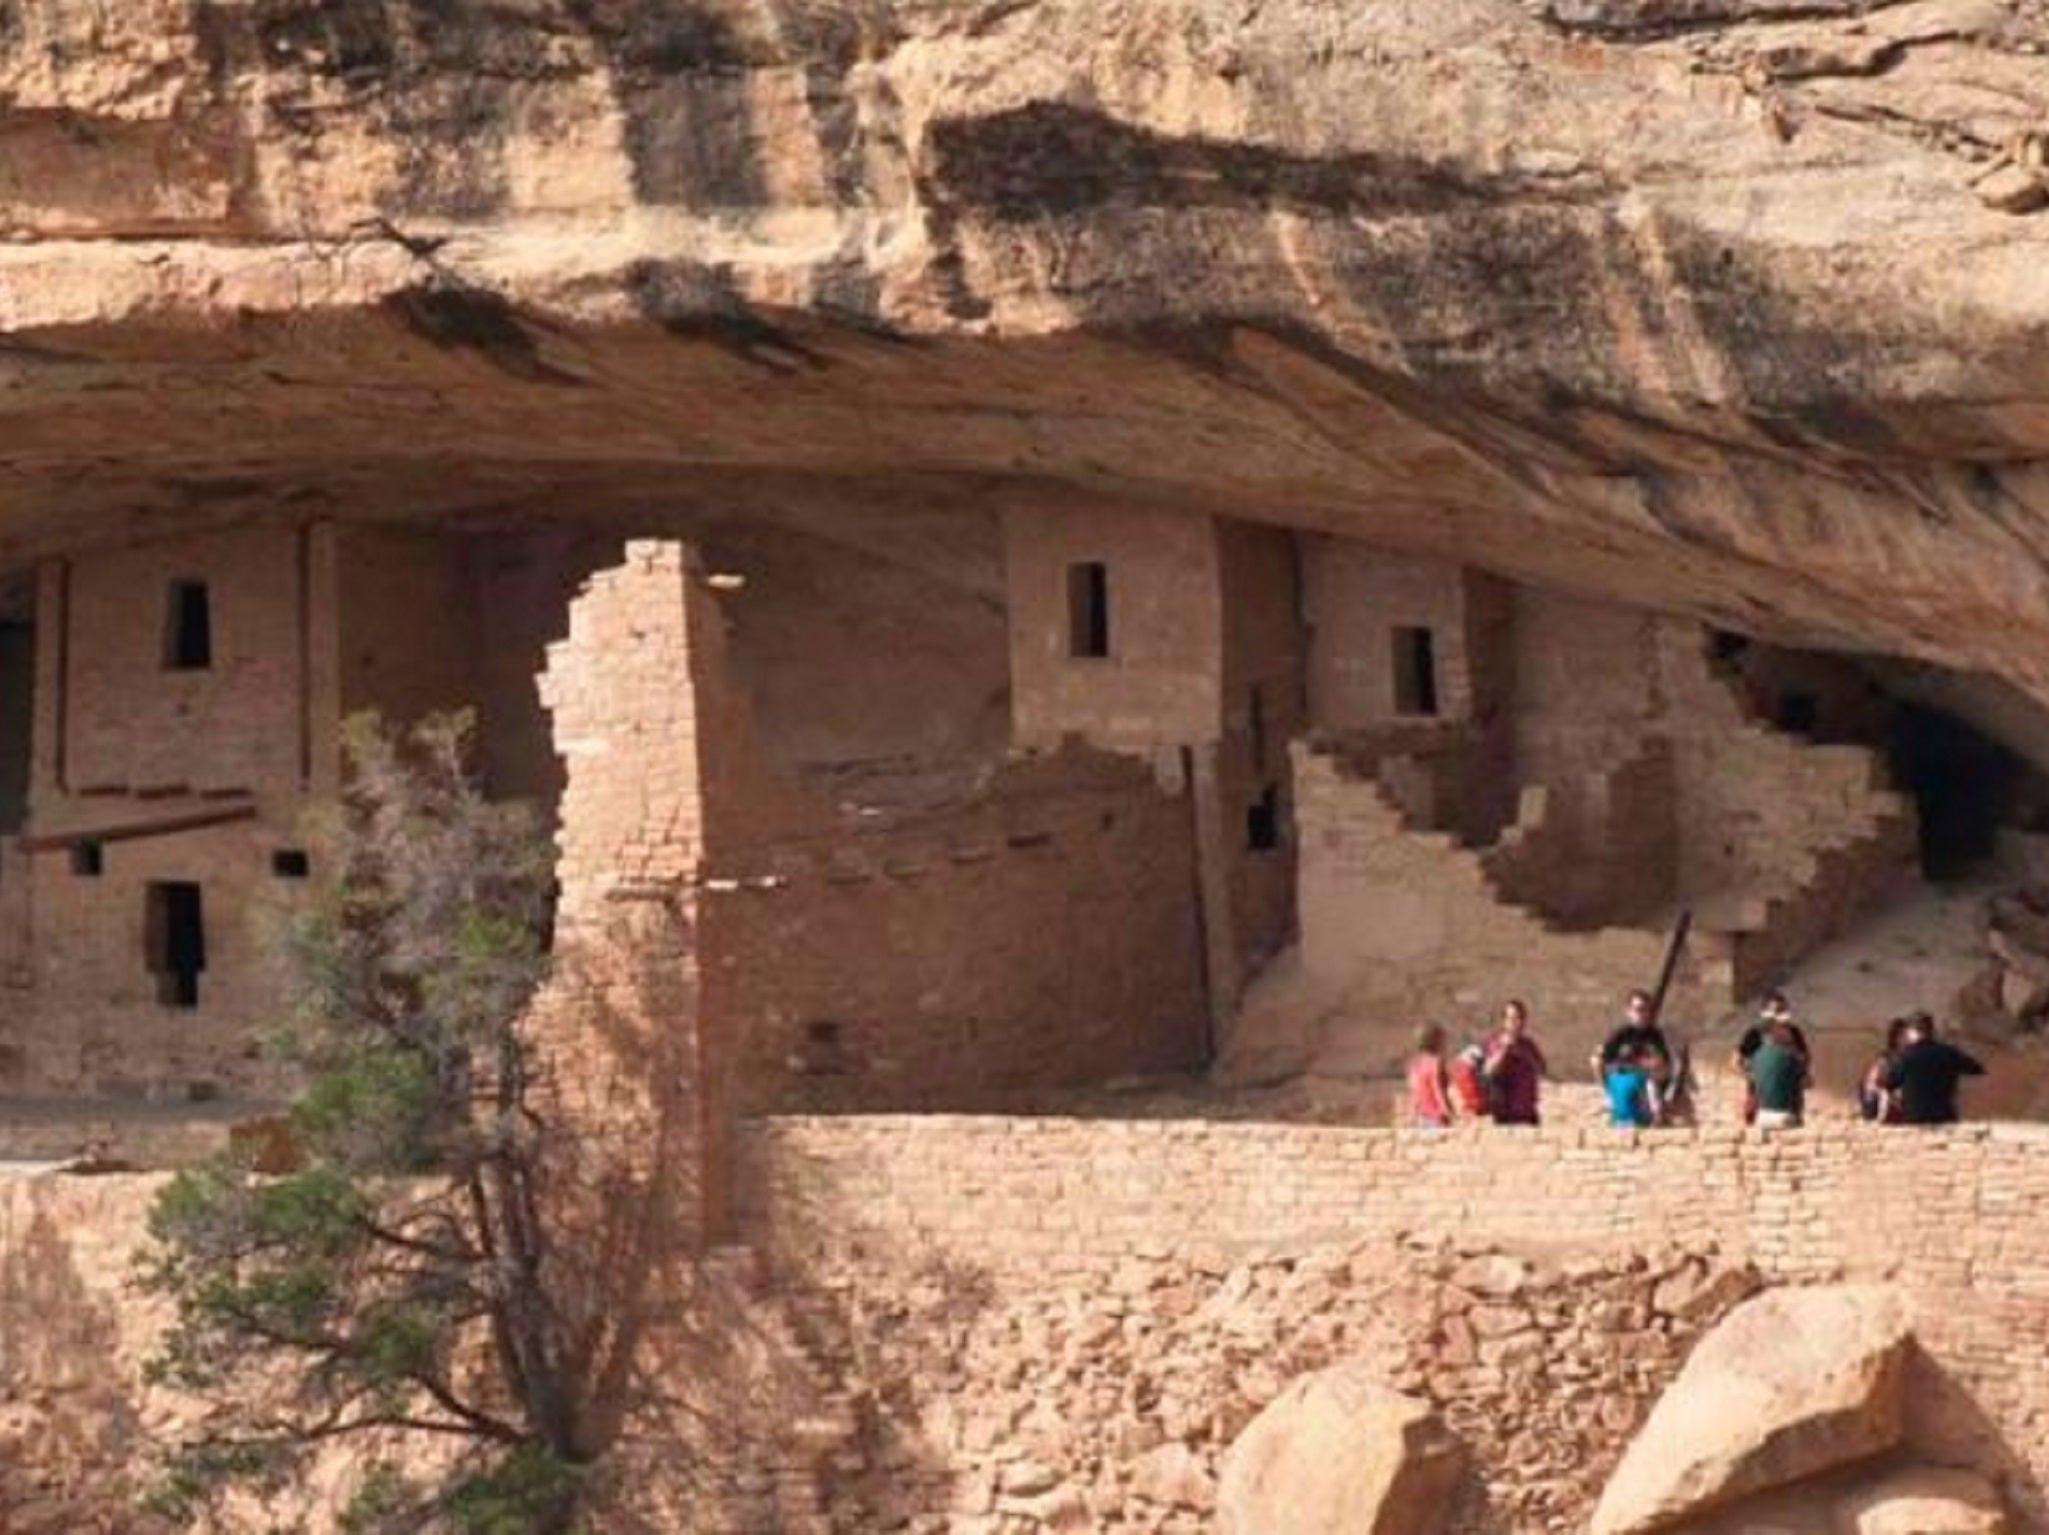 Colorado's Mesa Verde National Park is home to ancient architectural sites including 600 cliff dwellings